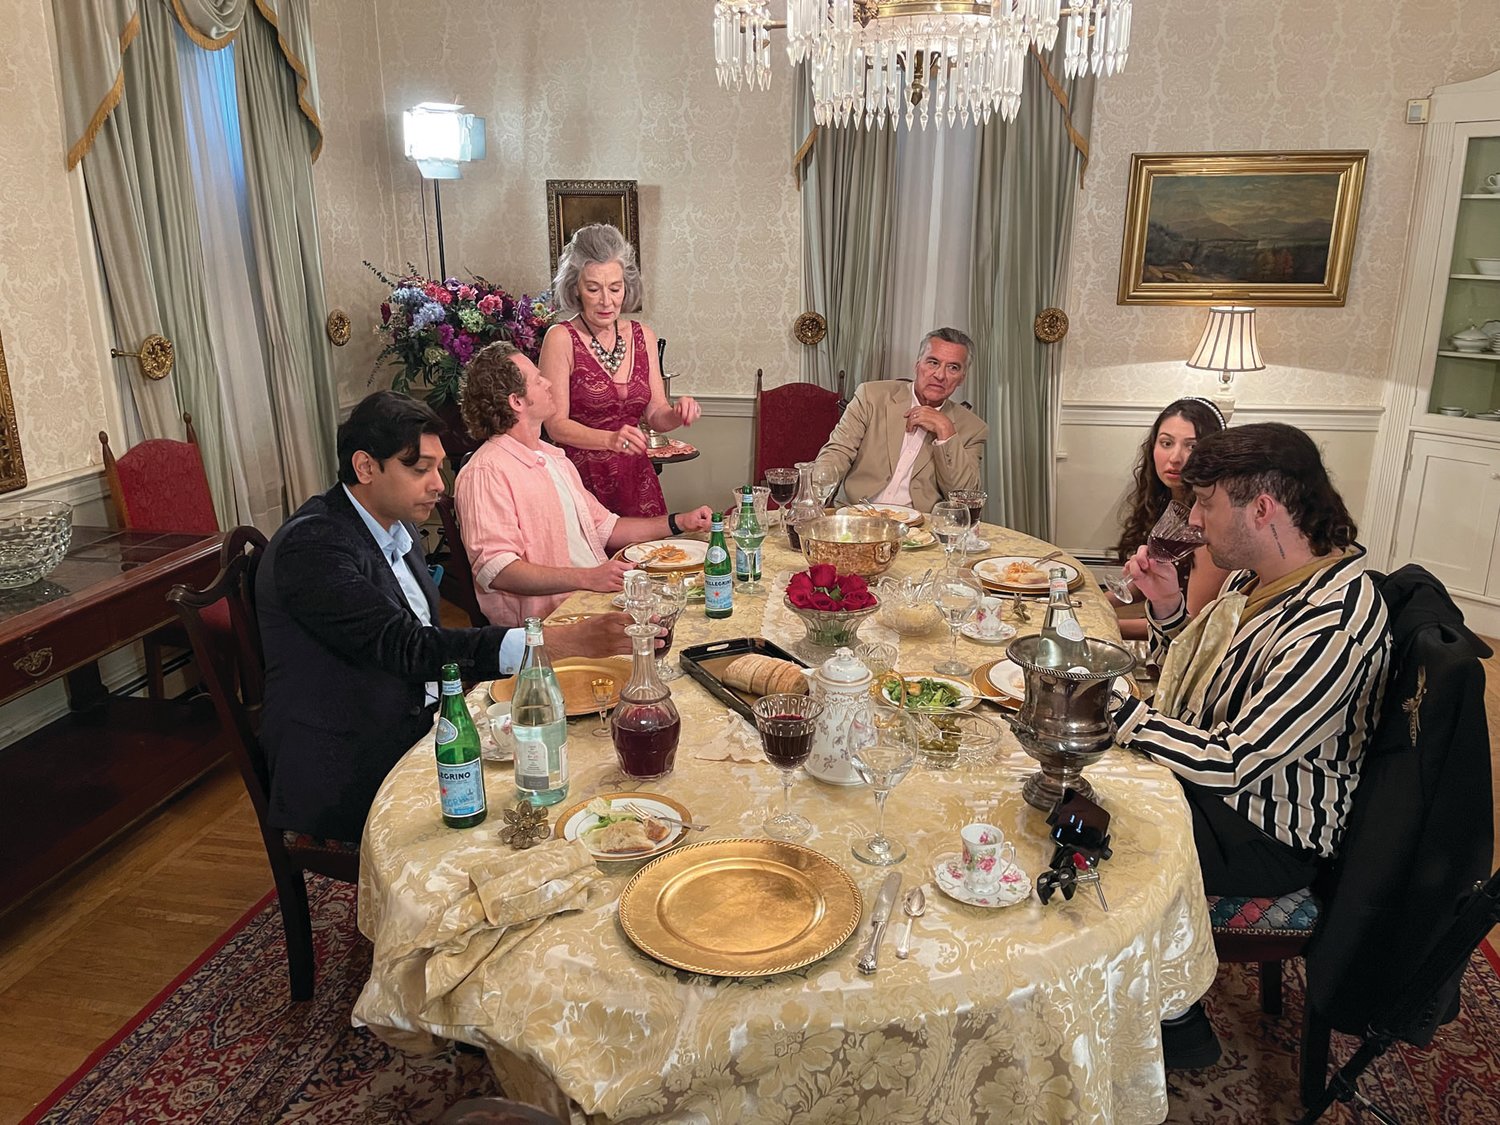 ON SET: Actors in “Poor Paul” film a scene in Sprague Mansion’s dining room on Friday. Pictured, from left, are Abhi Sinda, Nick Pasqual, Sissy O’Hara, Stephen O’Neil Martin, Courtney Danforth and Adam Carbone.